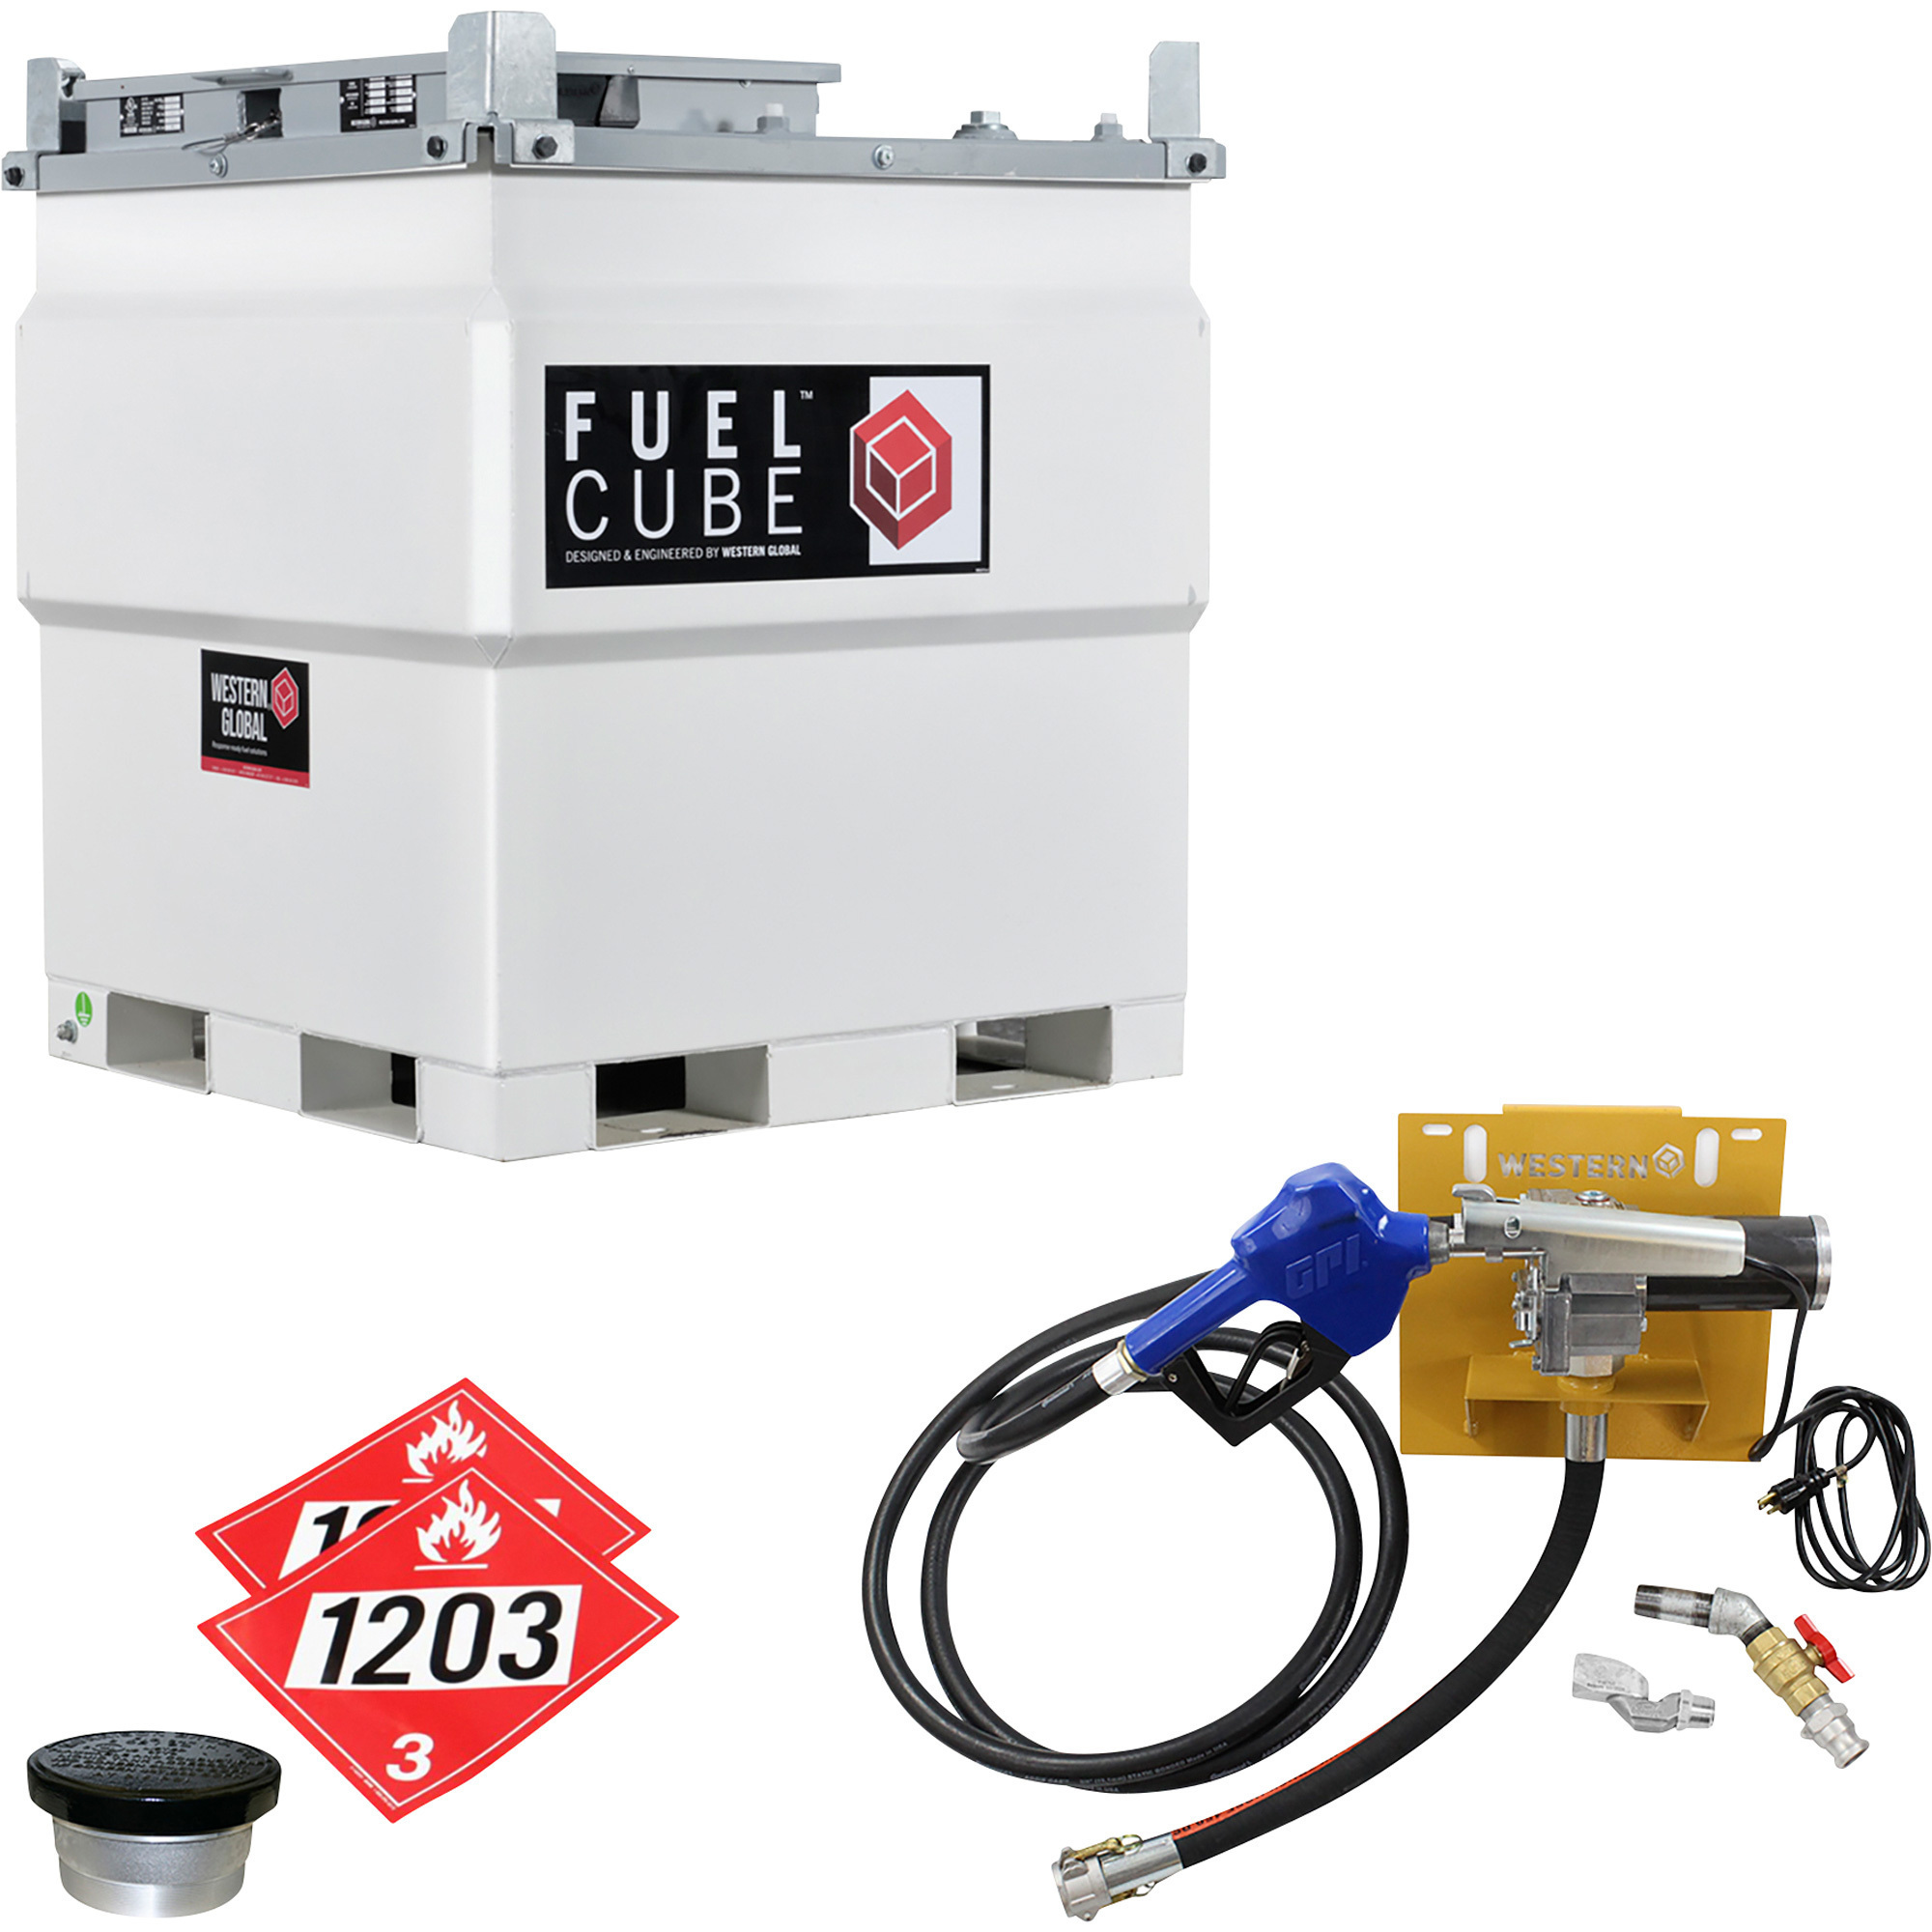 Western Global FuelCube Gasoline Fuel Tank Kit with Venting Kit, Pump and  Fuel Level Gauge, Model# FCPWN0250-11512GP-SNN-G